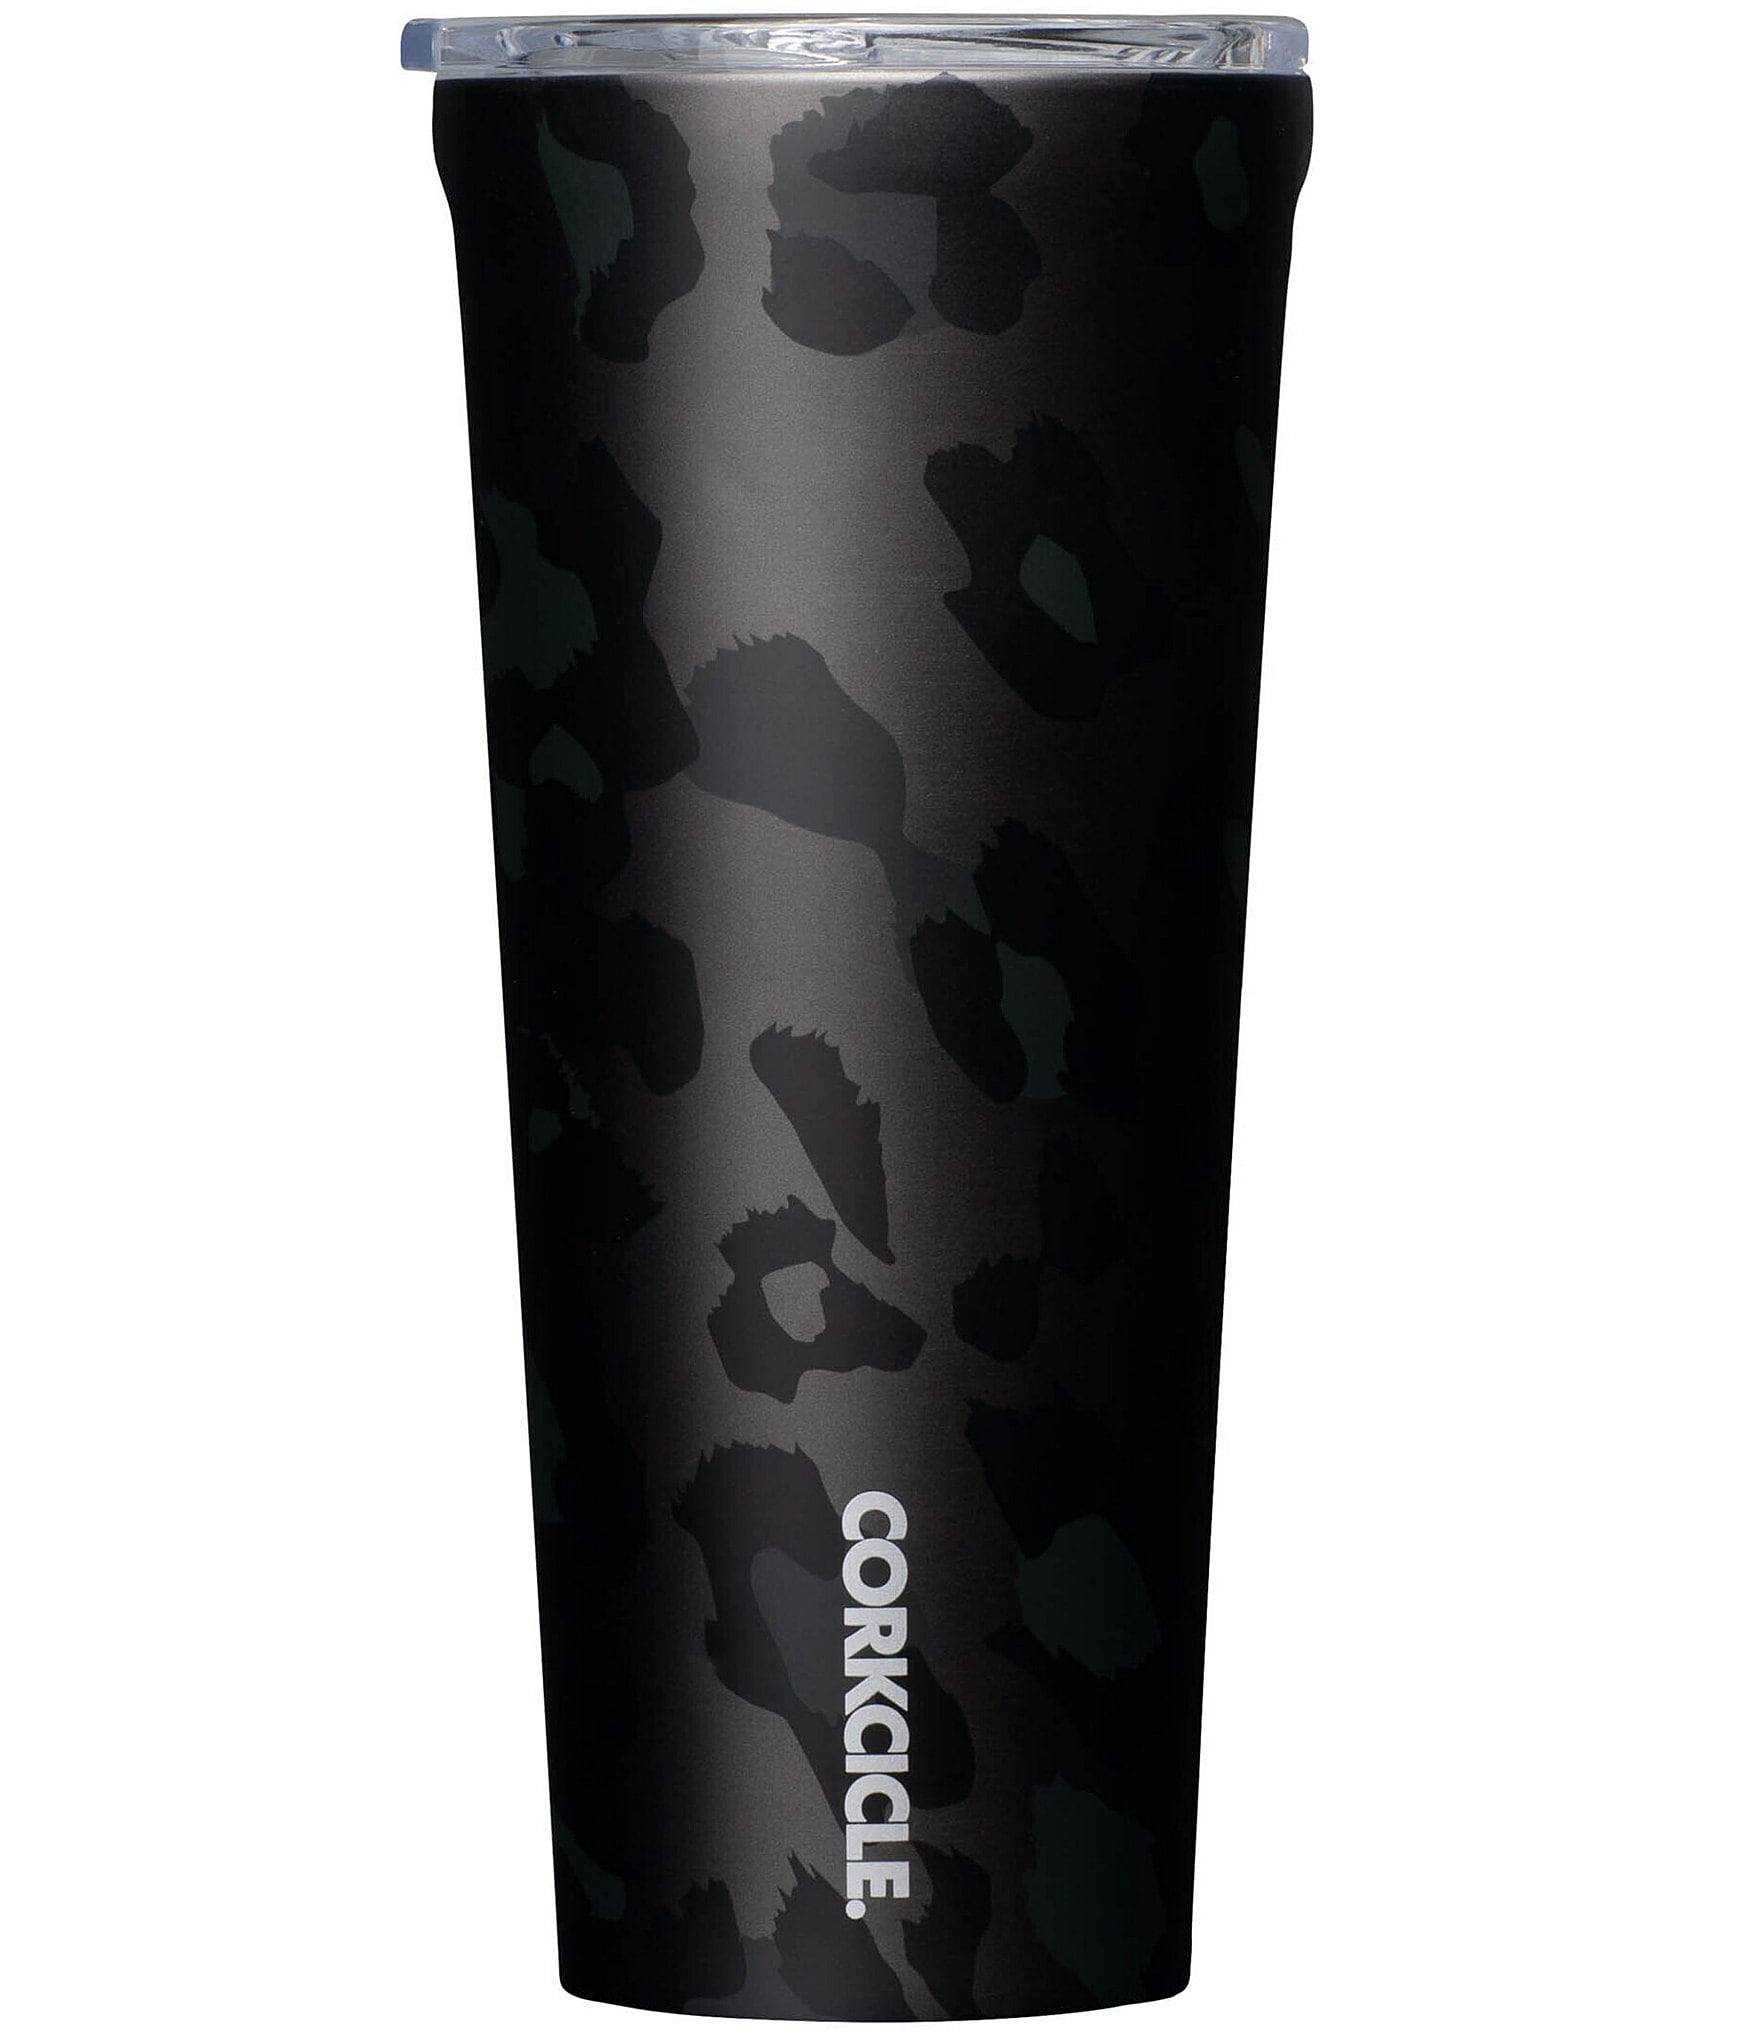 https://dimg.dillards.com/is/image/DillardsZoom/zoom/corkcicle-stainless-steel-triple-insulated-24-oz.-exotic-night-leopard-tumbler/00000000_zi_20383779.jpg